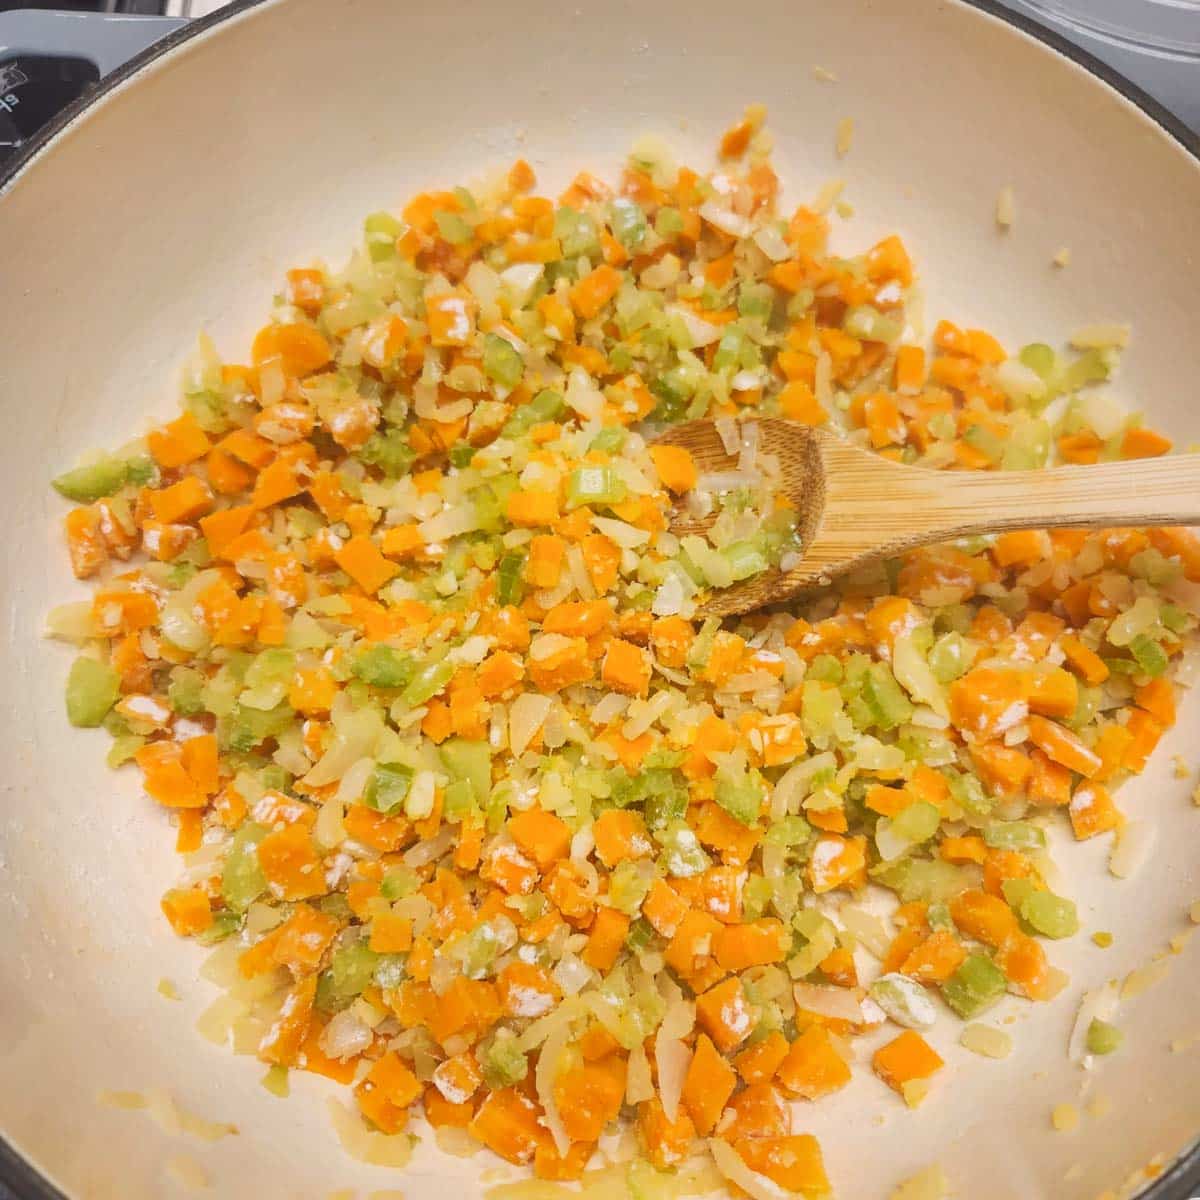 a roux of flour and oil with carrots, onions and celery 